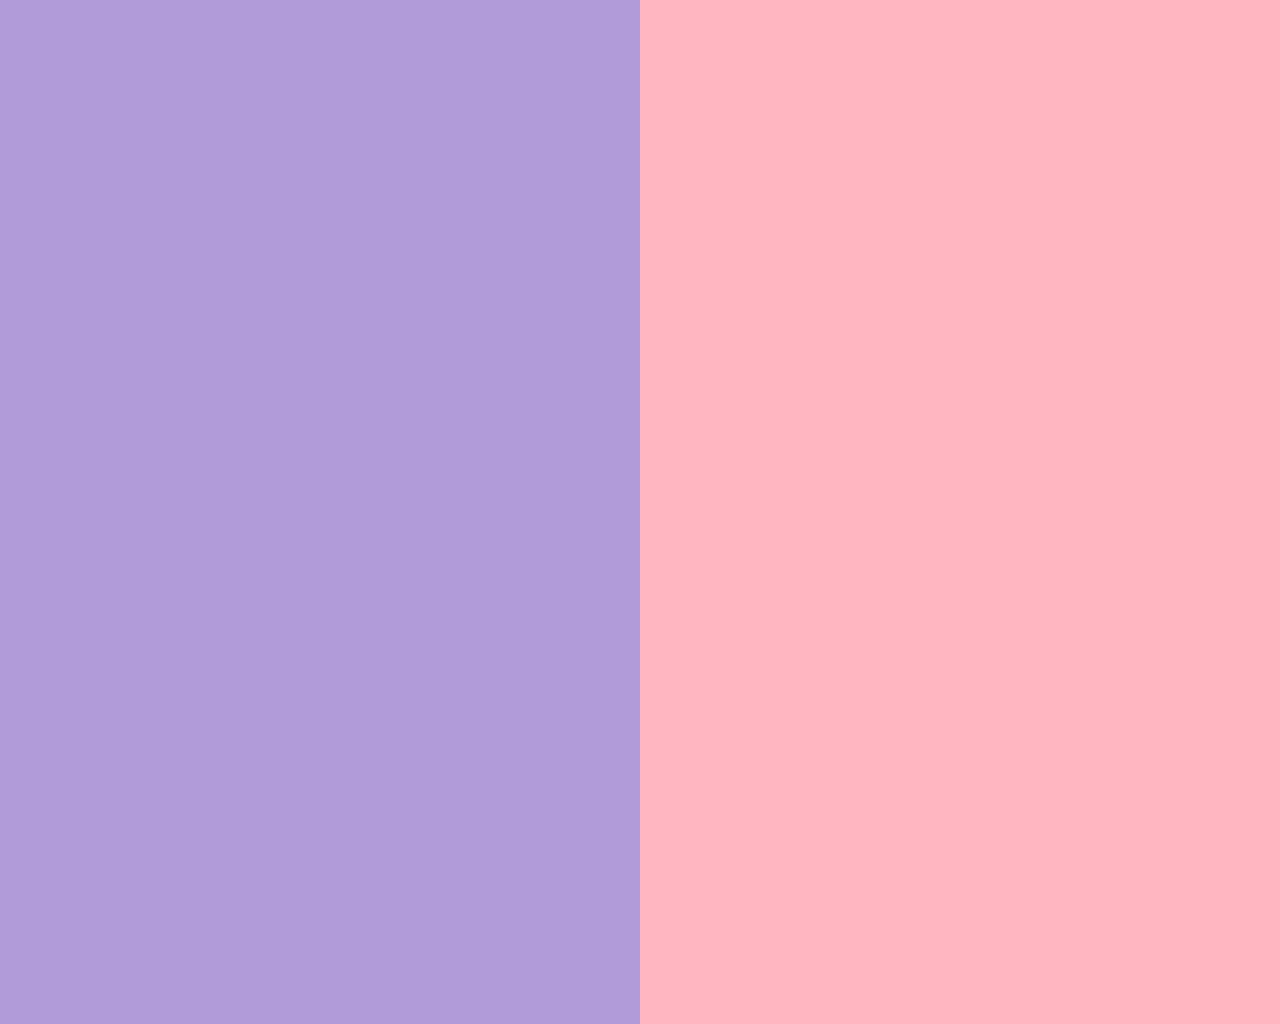 Free 1280x1024 resolution Light Pastel Purple and Light Pink solid two